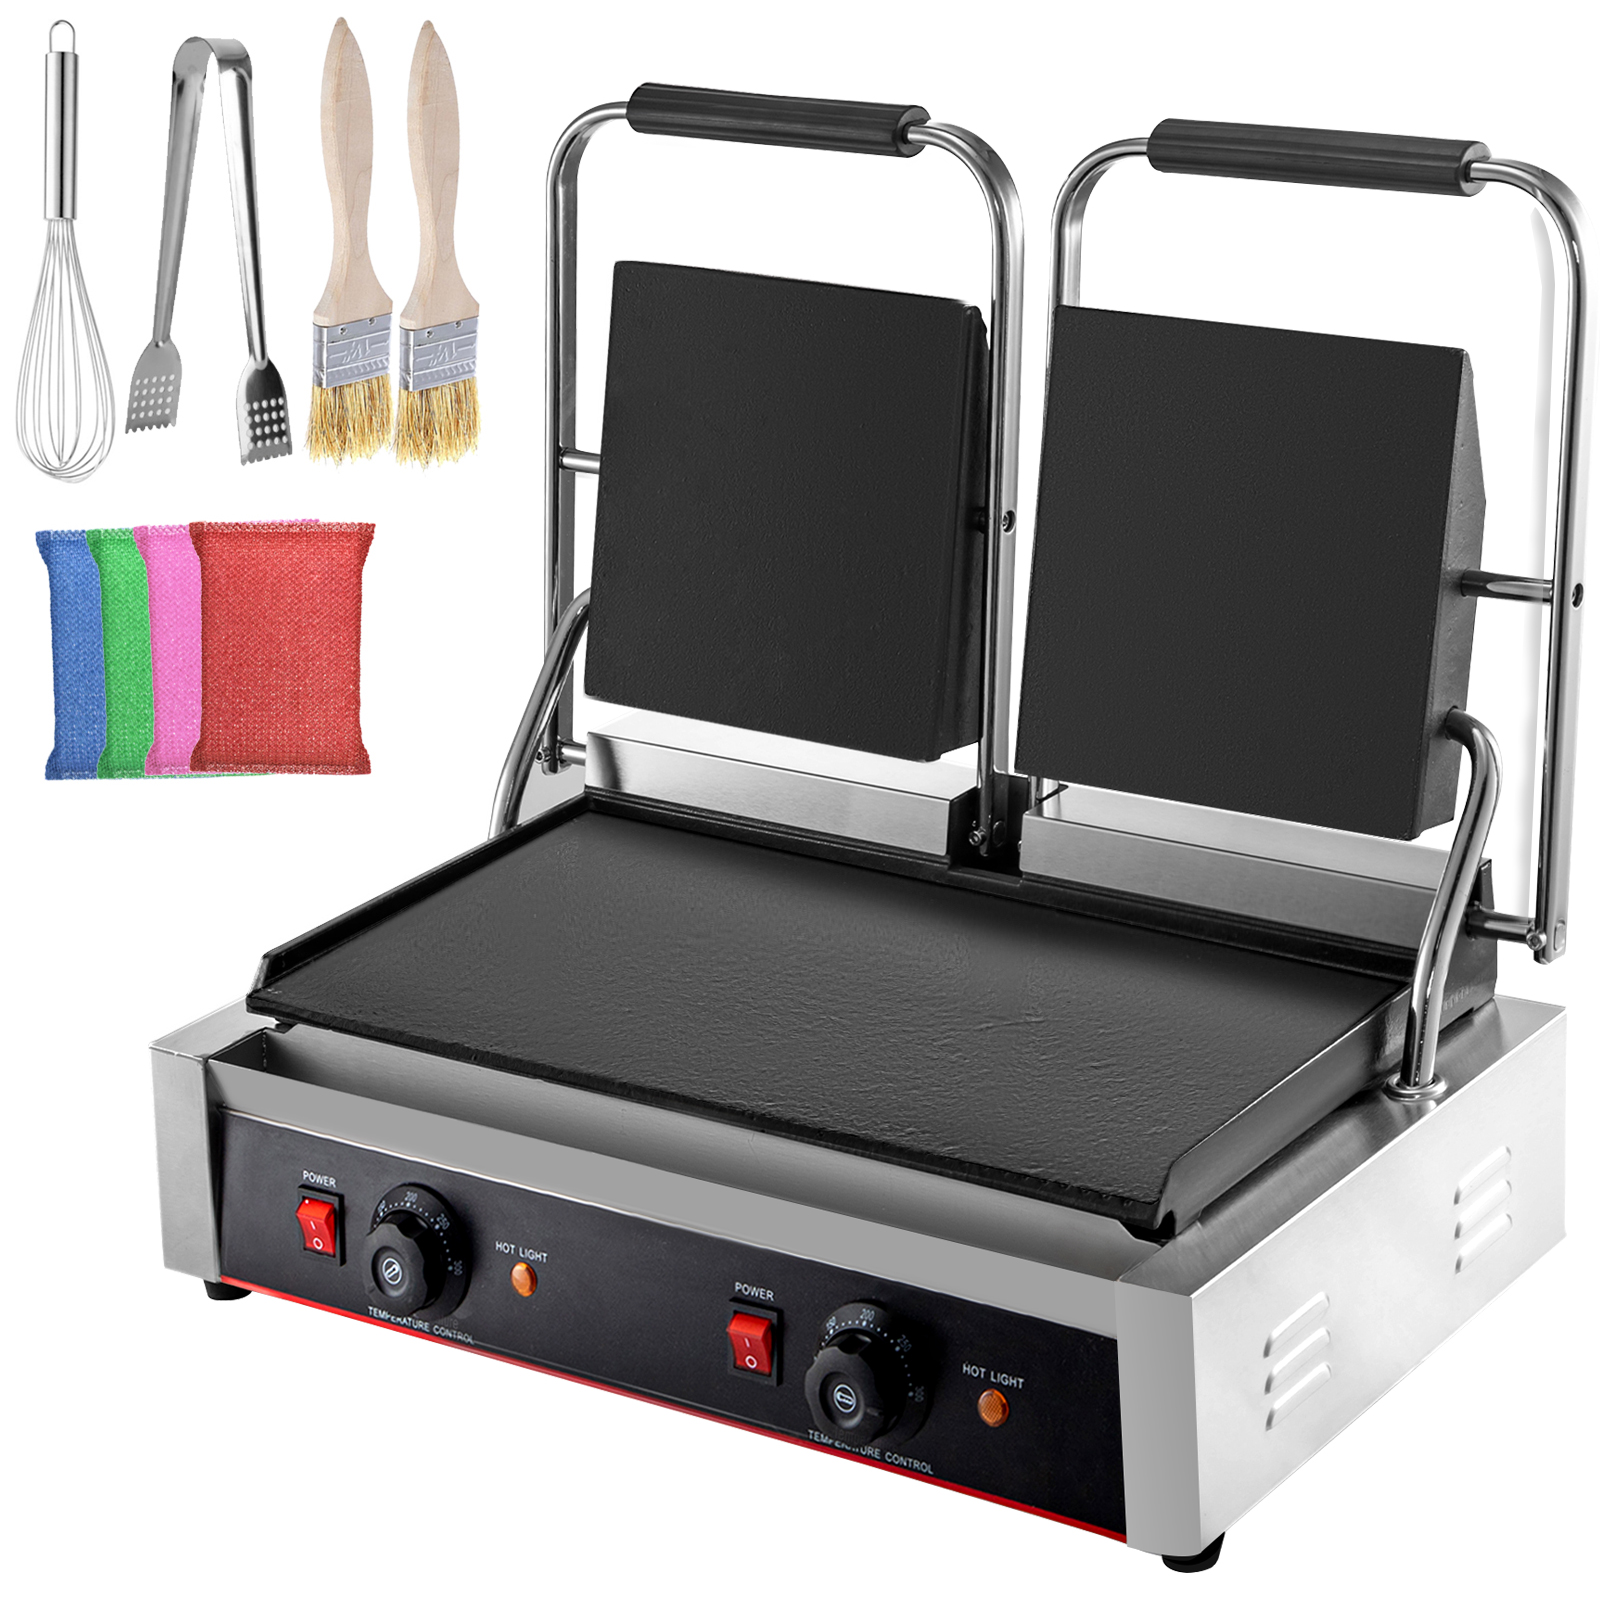 VEVOR Sandwich Panini Press Grill, 2X1800W Double Flat Plates Electric Stainless Steel Maker, Temperature Control 122°F-572°F Non Stick Surface for Hamburgers Steaks Bacons. | VEVOR US